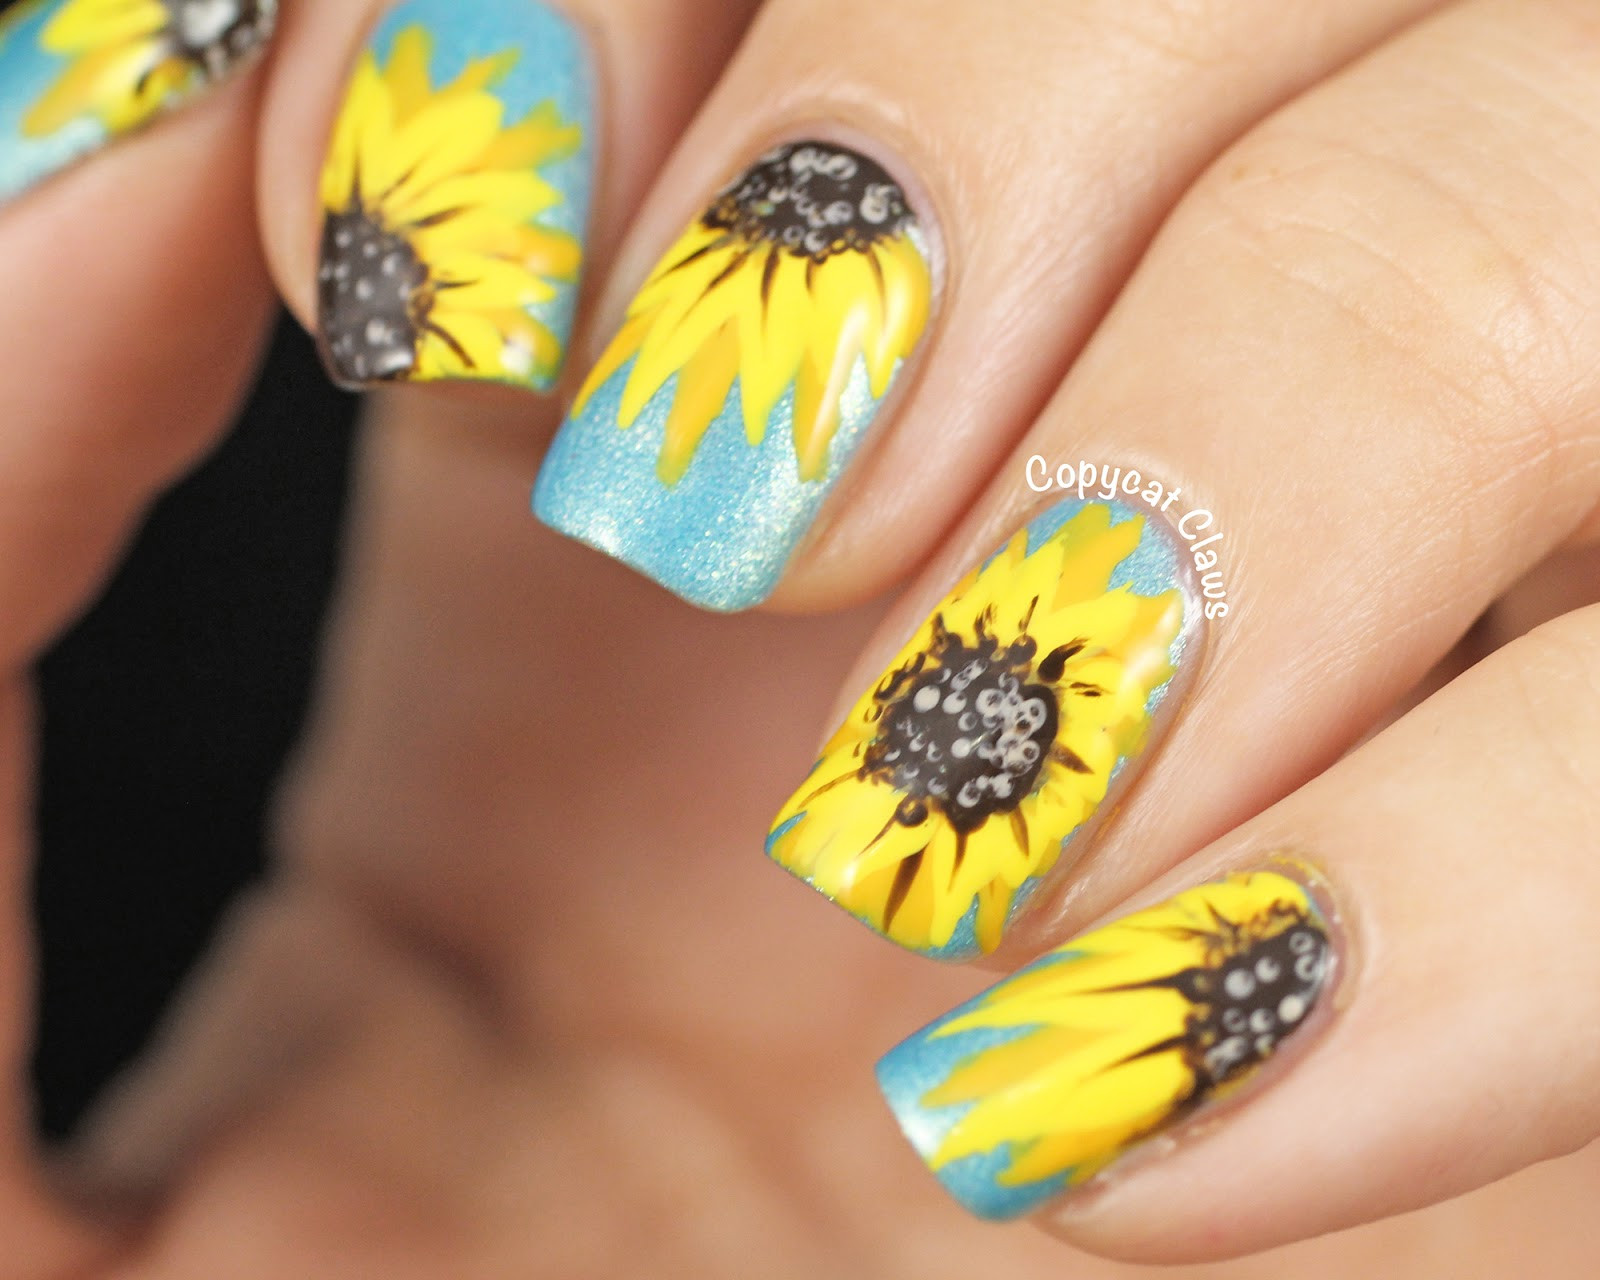 Sunflower Nail Designs
 Copycat Claws 31DC2014 Day 3 Yellow Sunflower Nail Art